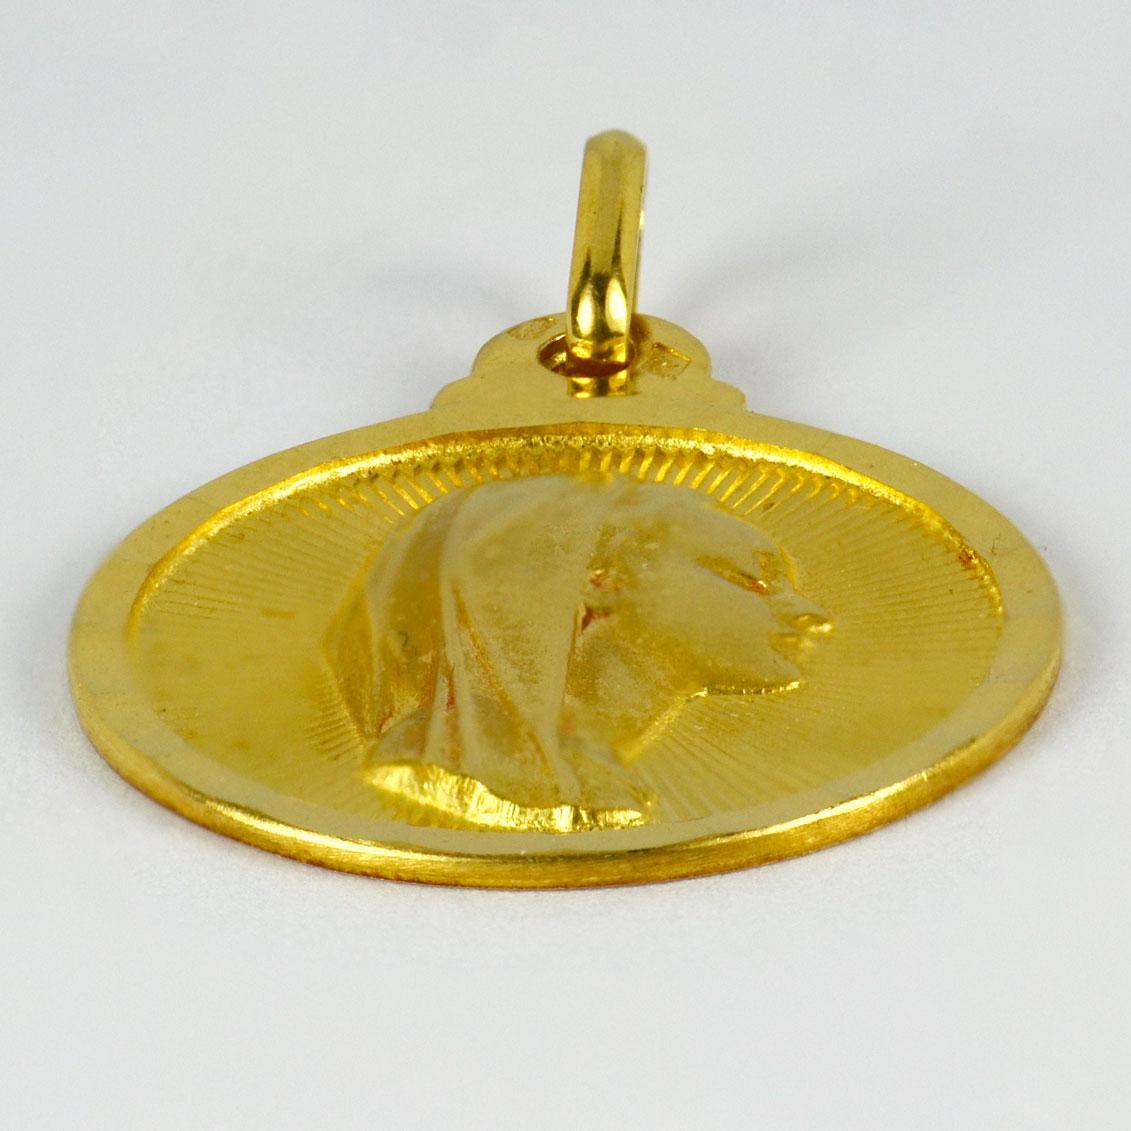 An 18 karat (18K) yellow gold pendant designed as a medal depicting the Virgin Mary within a sunburst. Stamped with the eagle’s head for French manufacture and 18 karat gold, with maker’s mark for Sonne of Lyon.

Dimensions: 2.5 x 2.1 x 0.2 cm (not